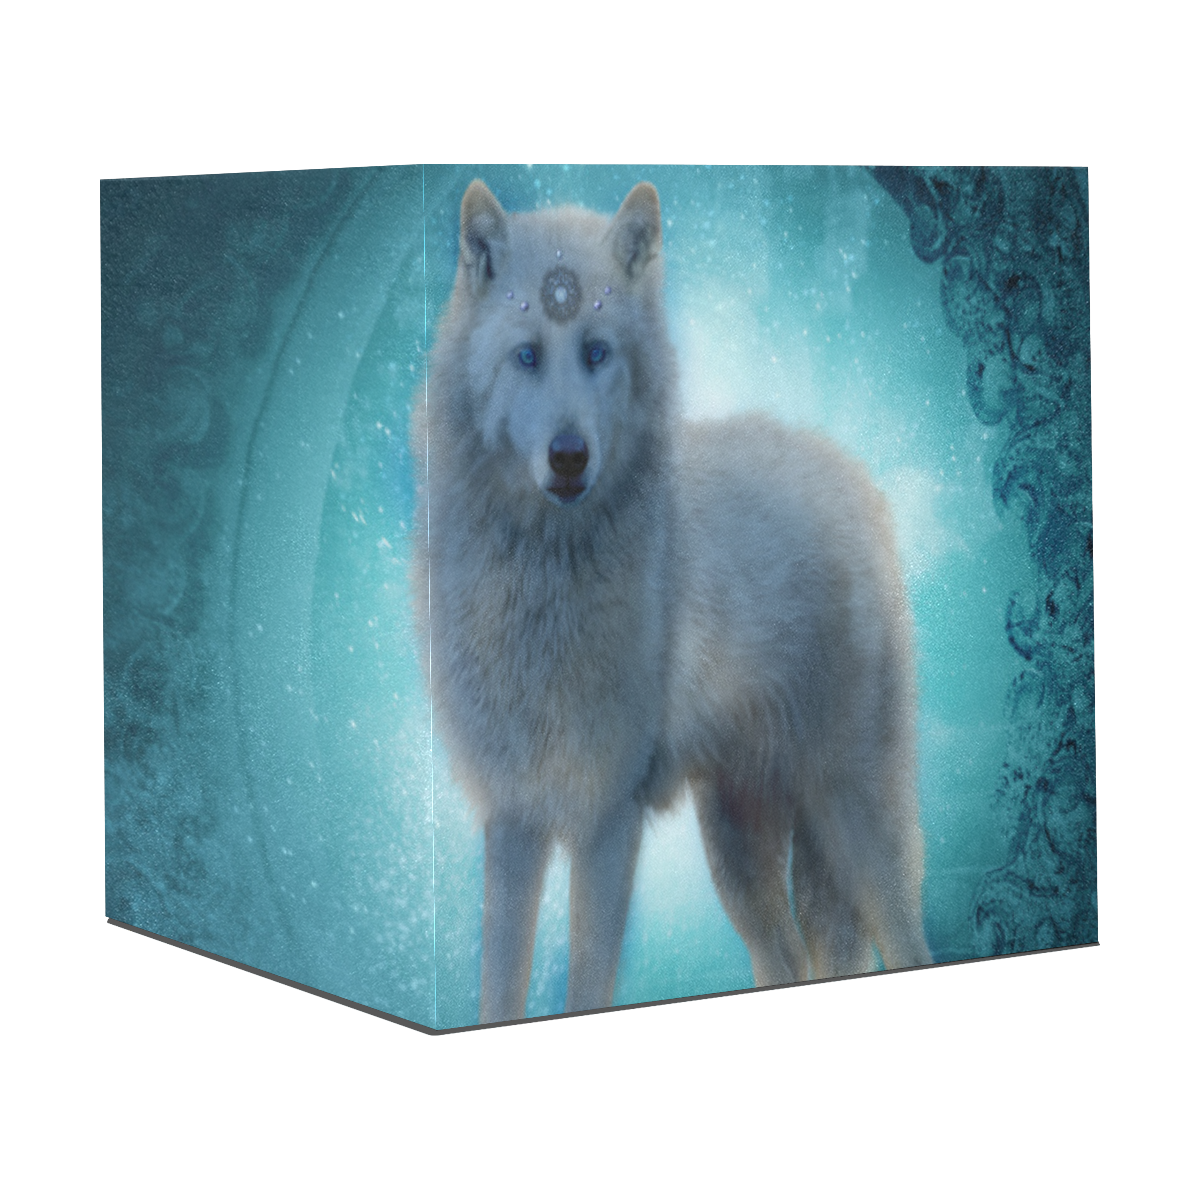 Wonderful white wolf in the night Gift Wrapping Paper 58"x 23" (3 Rolls)